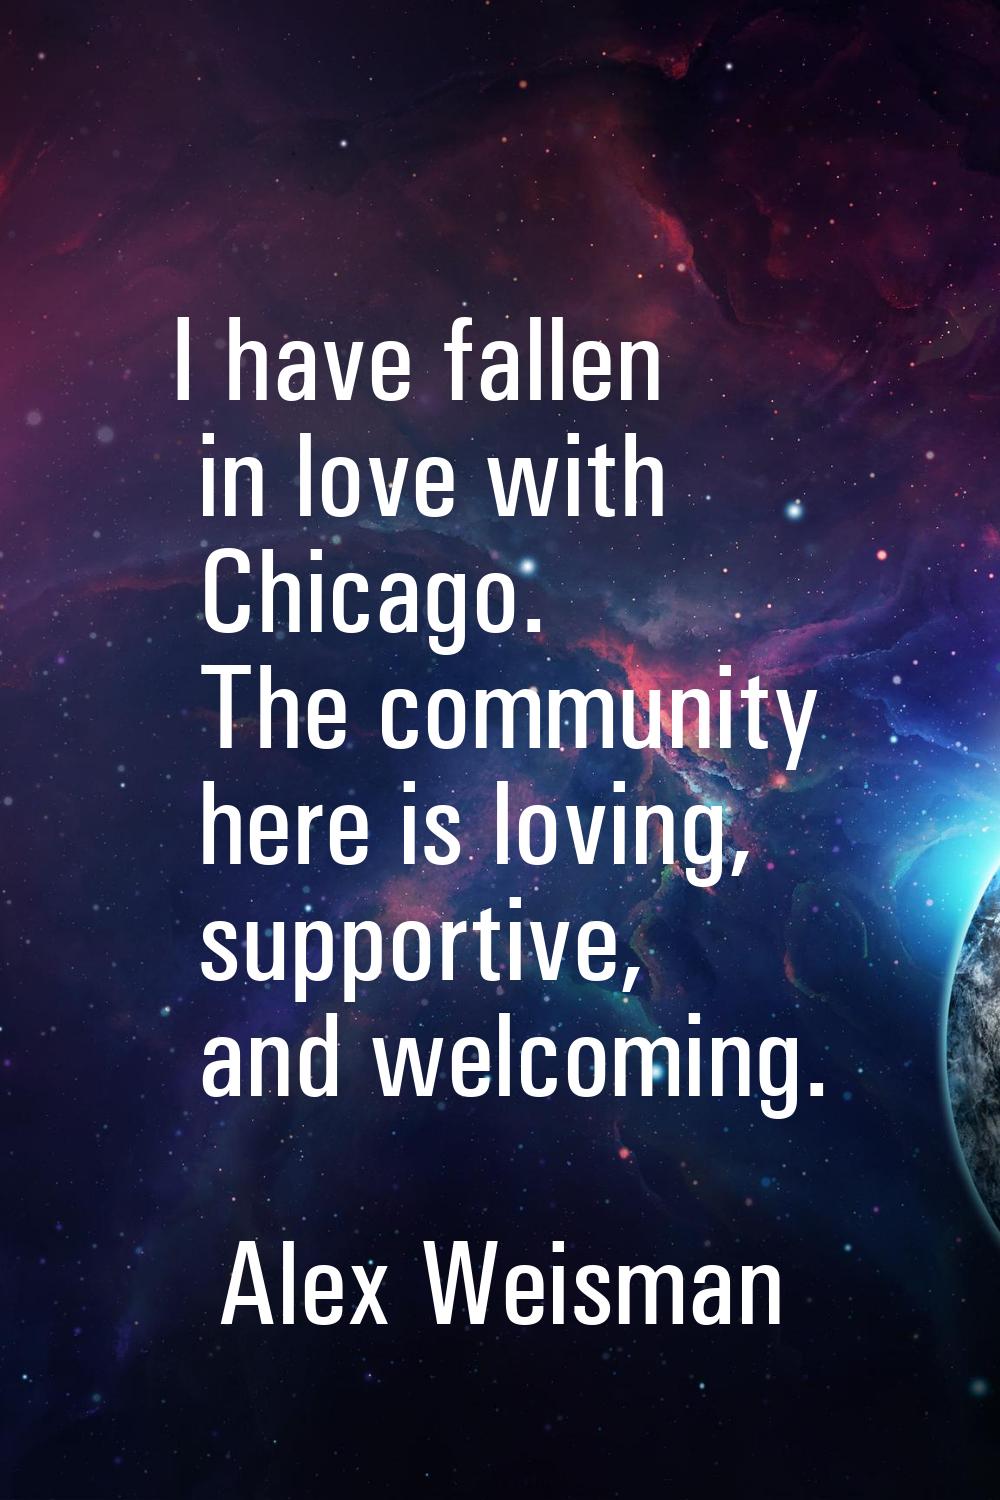 I have fallen in love with Chicago. The community here is loving, supportive, and welcoming.